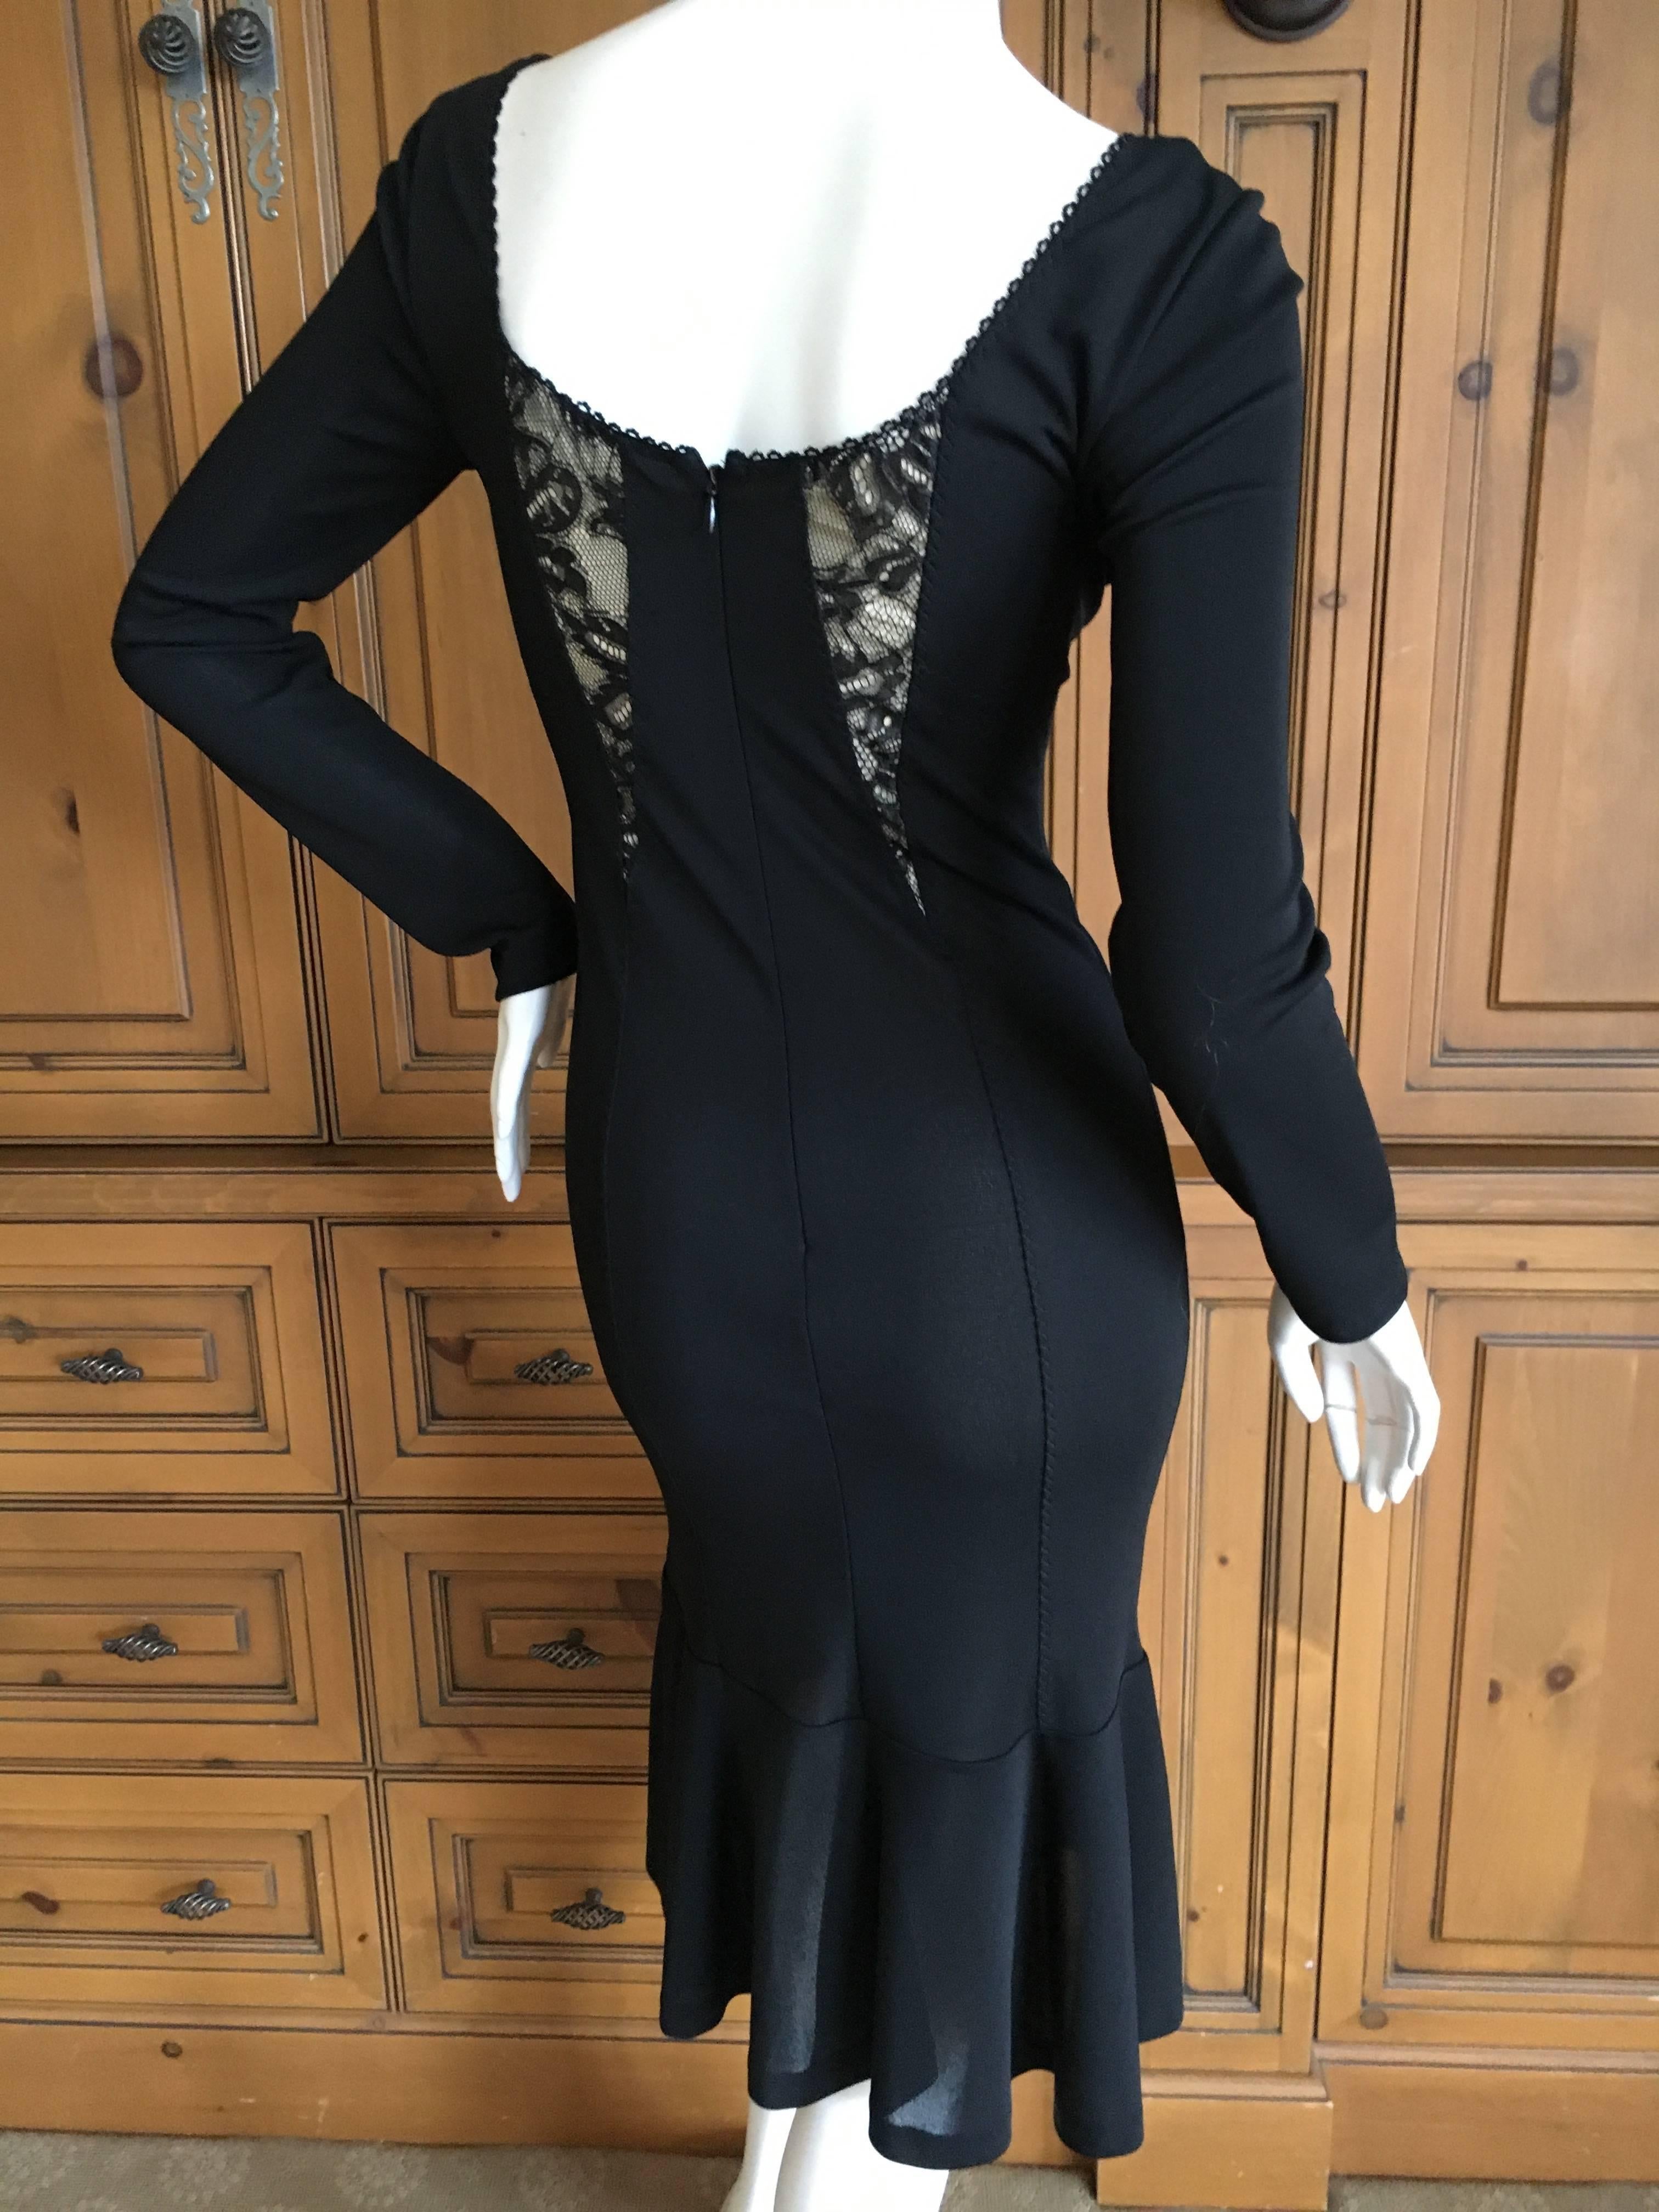 D&G Dolce & Gabbana Vintage Little Black Dress with Sheer Lace Inserts 4